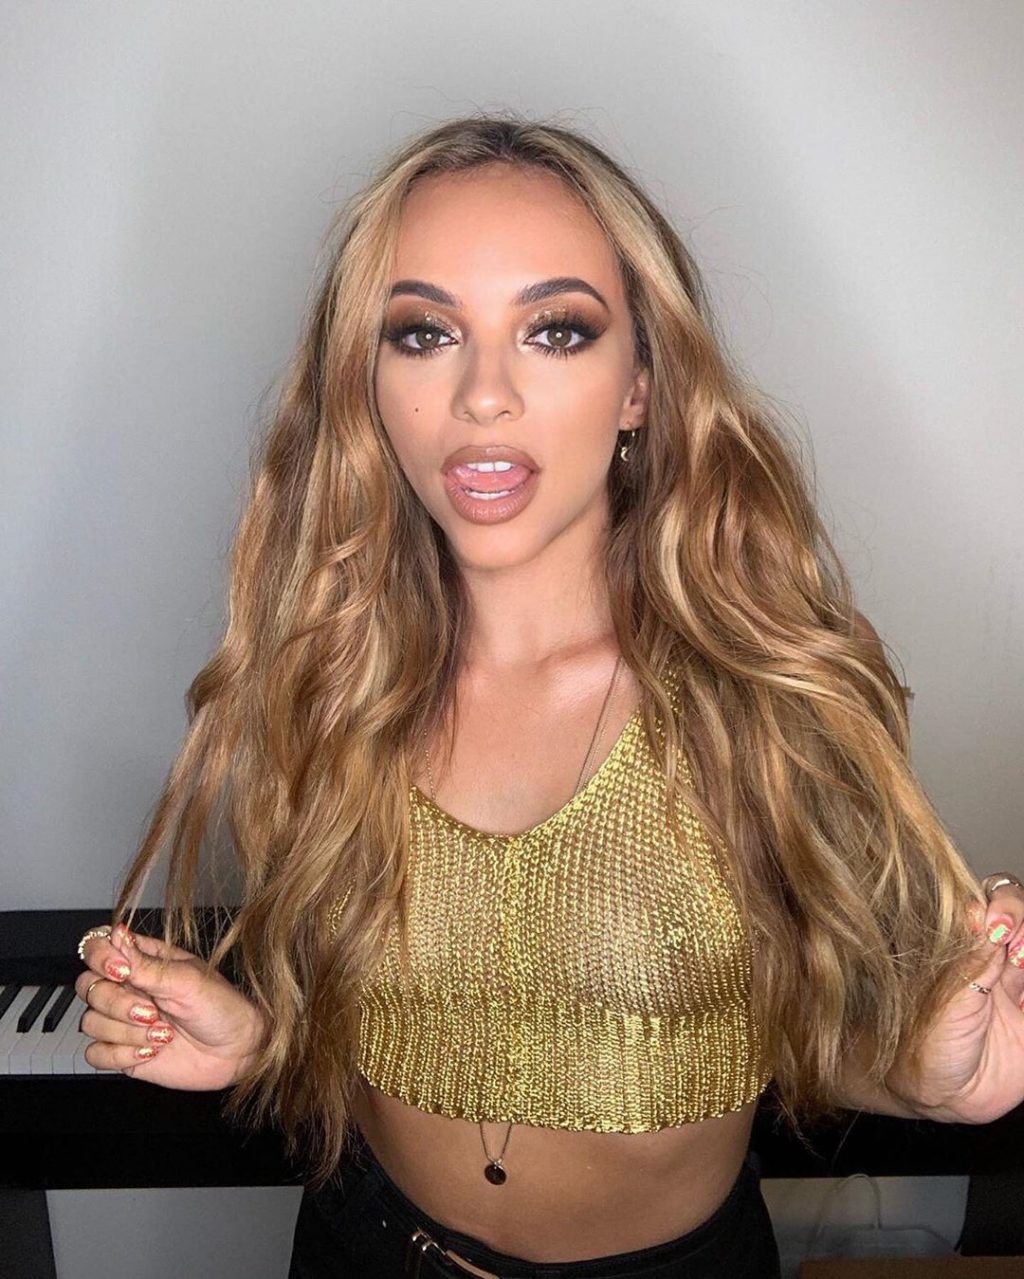 Jade Thirlwall Showed Her Nipples in a Sheer Top (2 Photos)